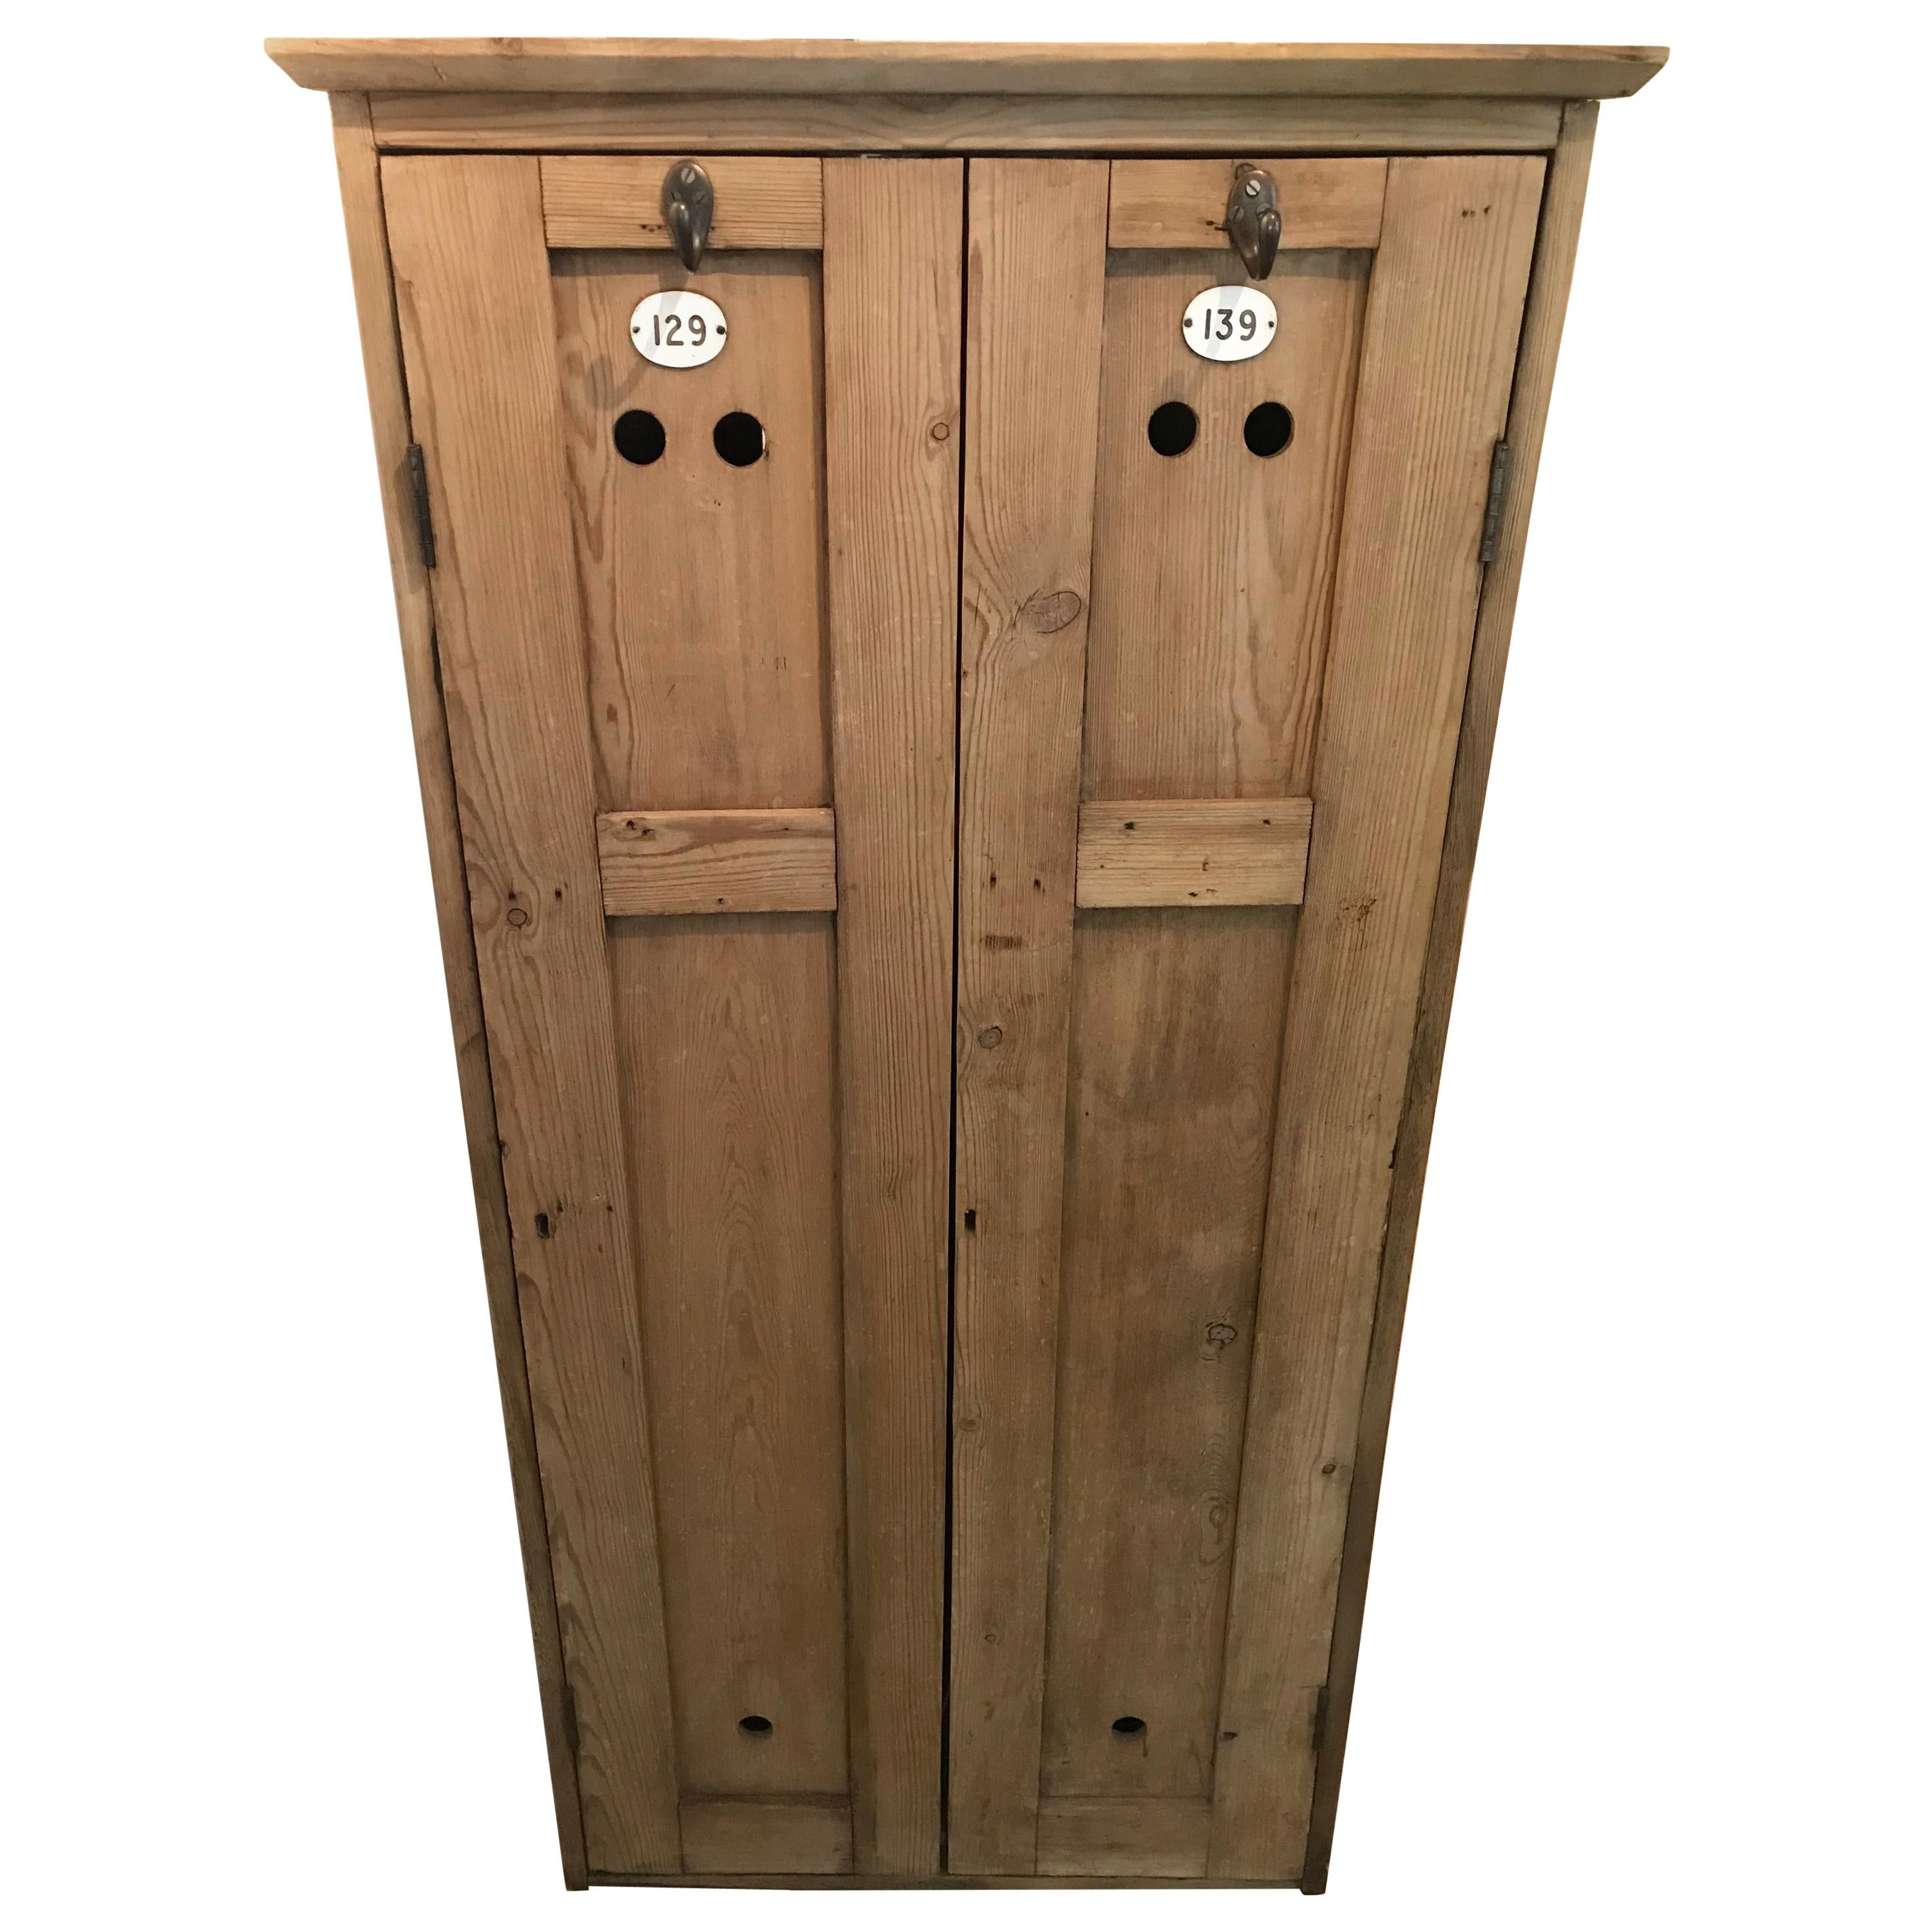 Early 20th Century Pine Lockers for Child’s Room, Mudroom, Hallway